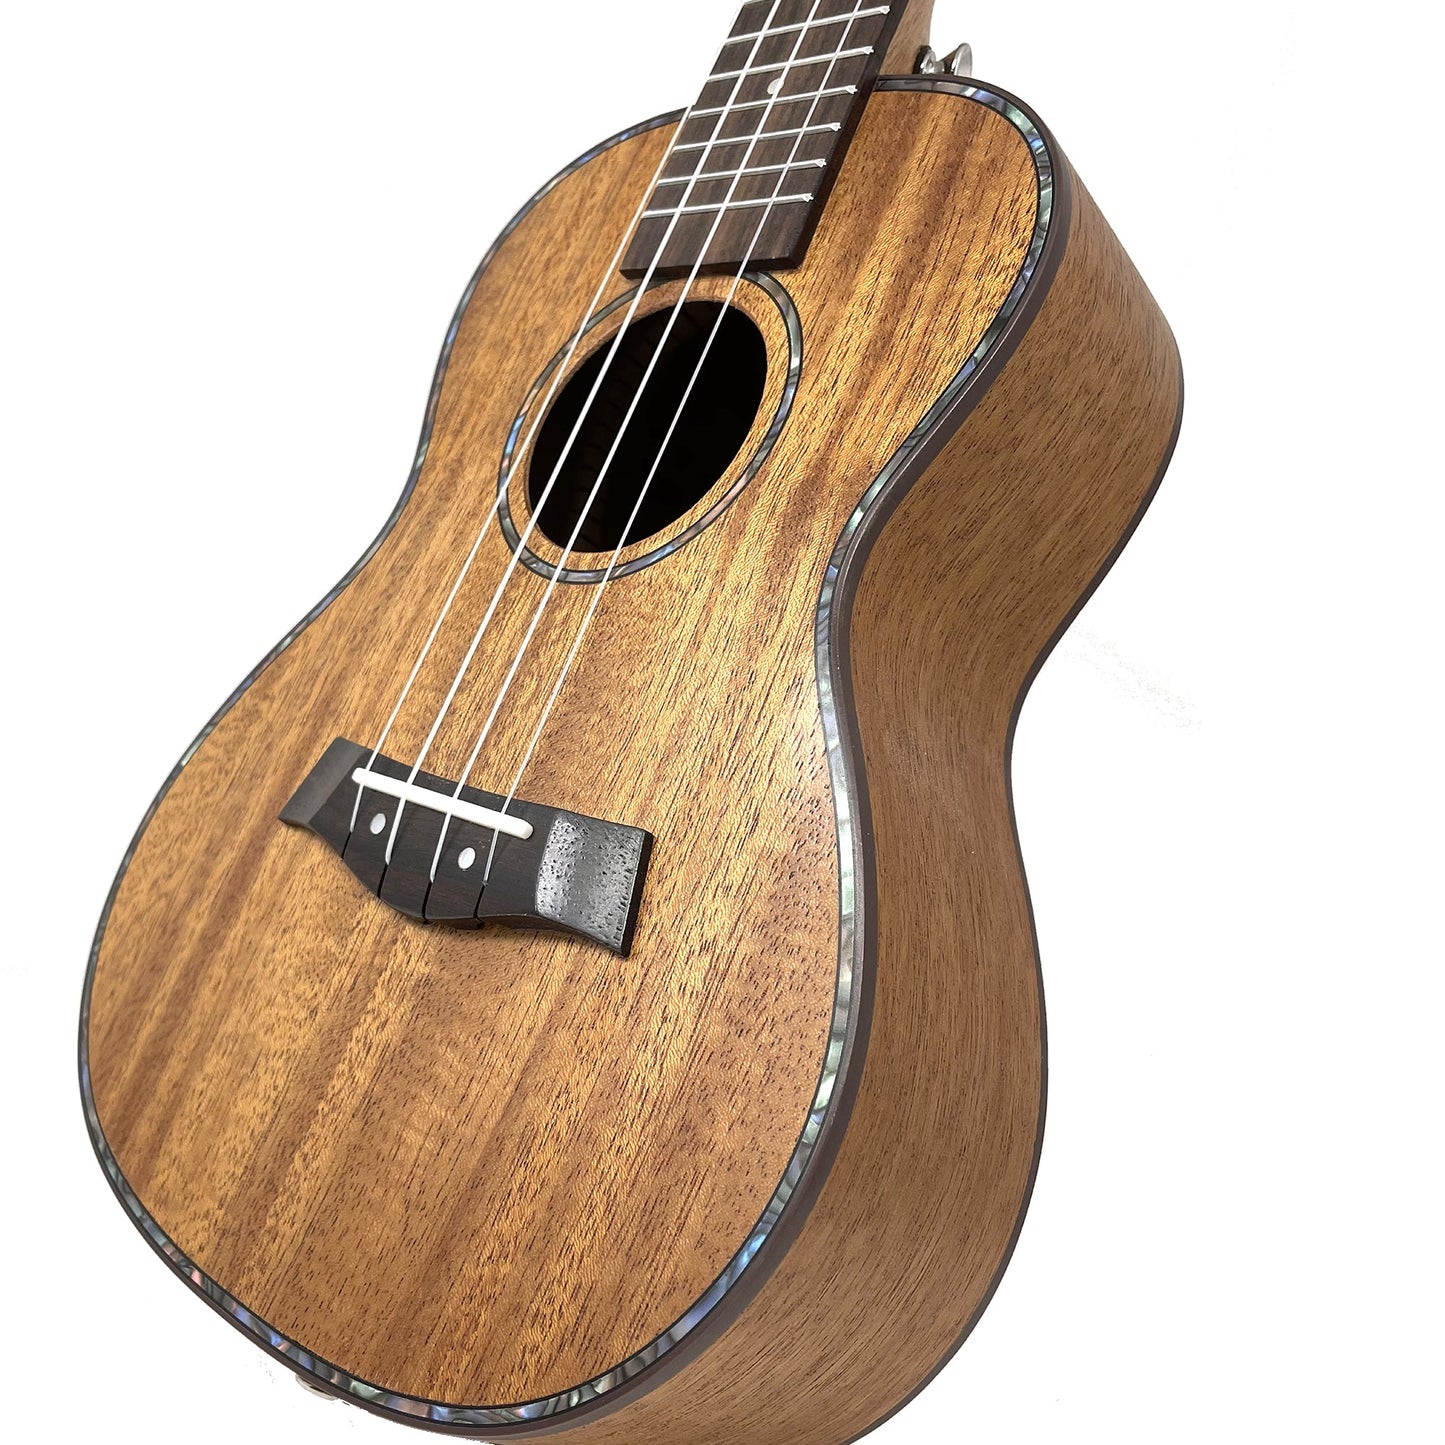 Kalena LM series Concert Mahogany Ukulele with Celluloid Binding Traditional complete set: Strings, Picks, Strap, Digital Tuner, Padded Case, Starter Guide